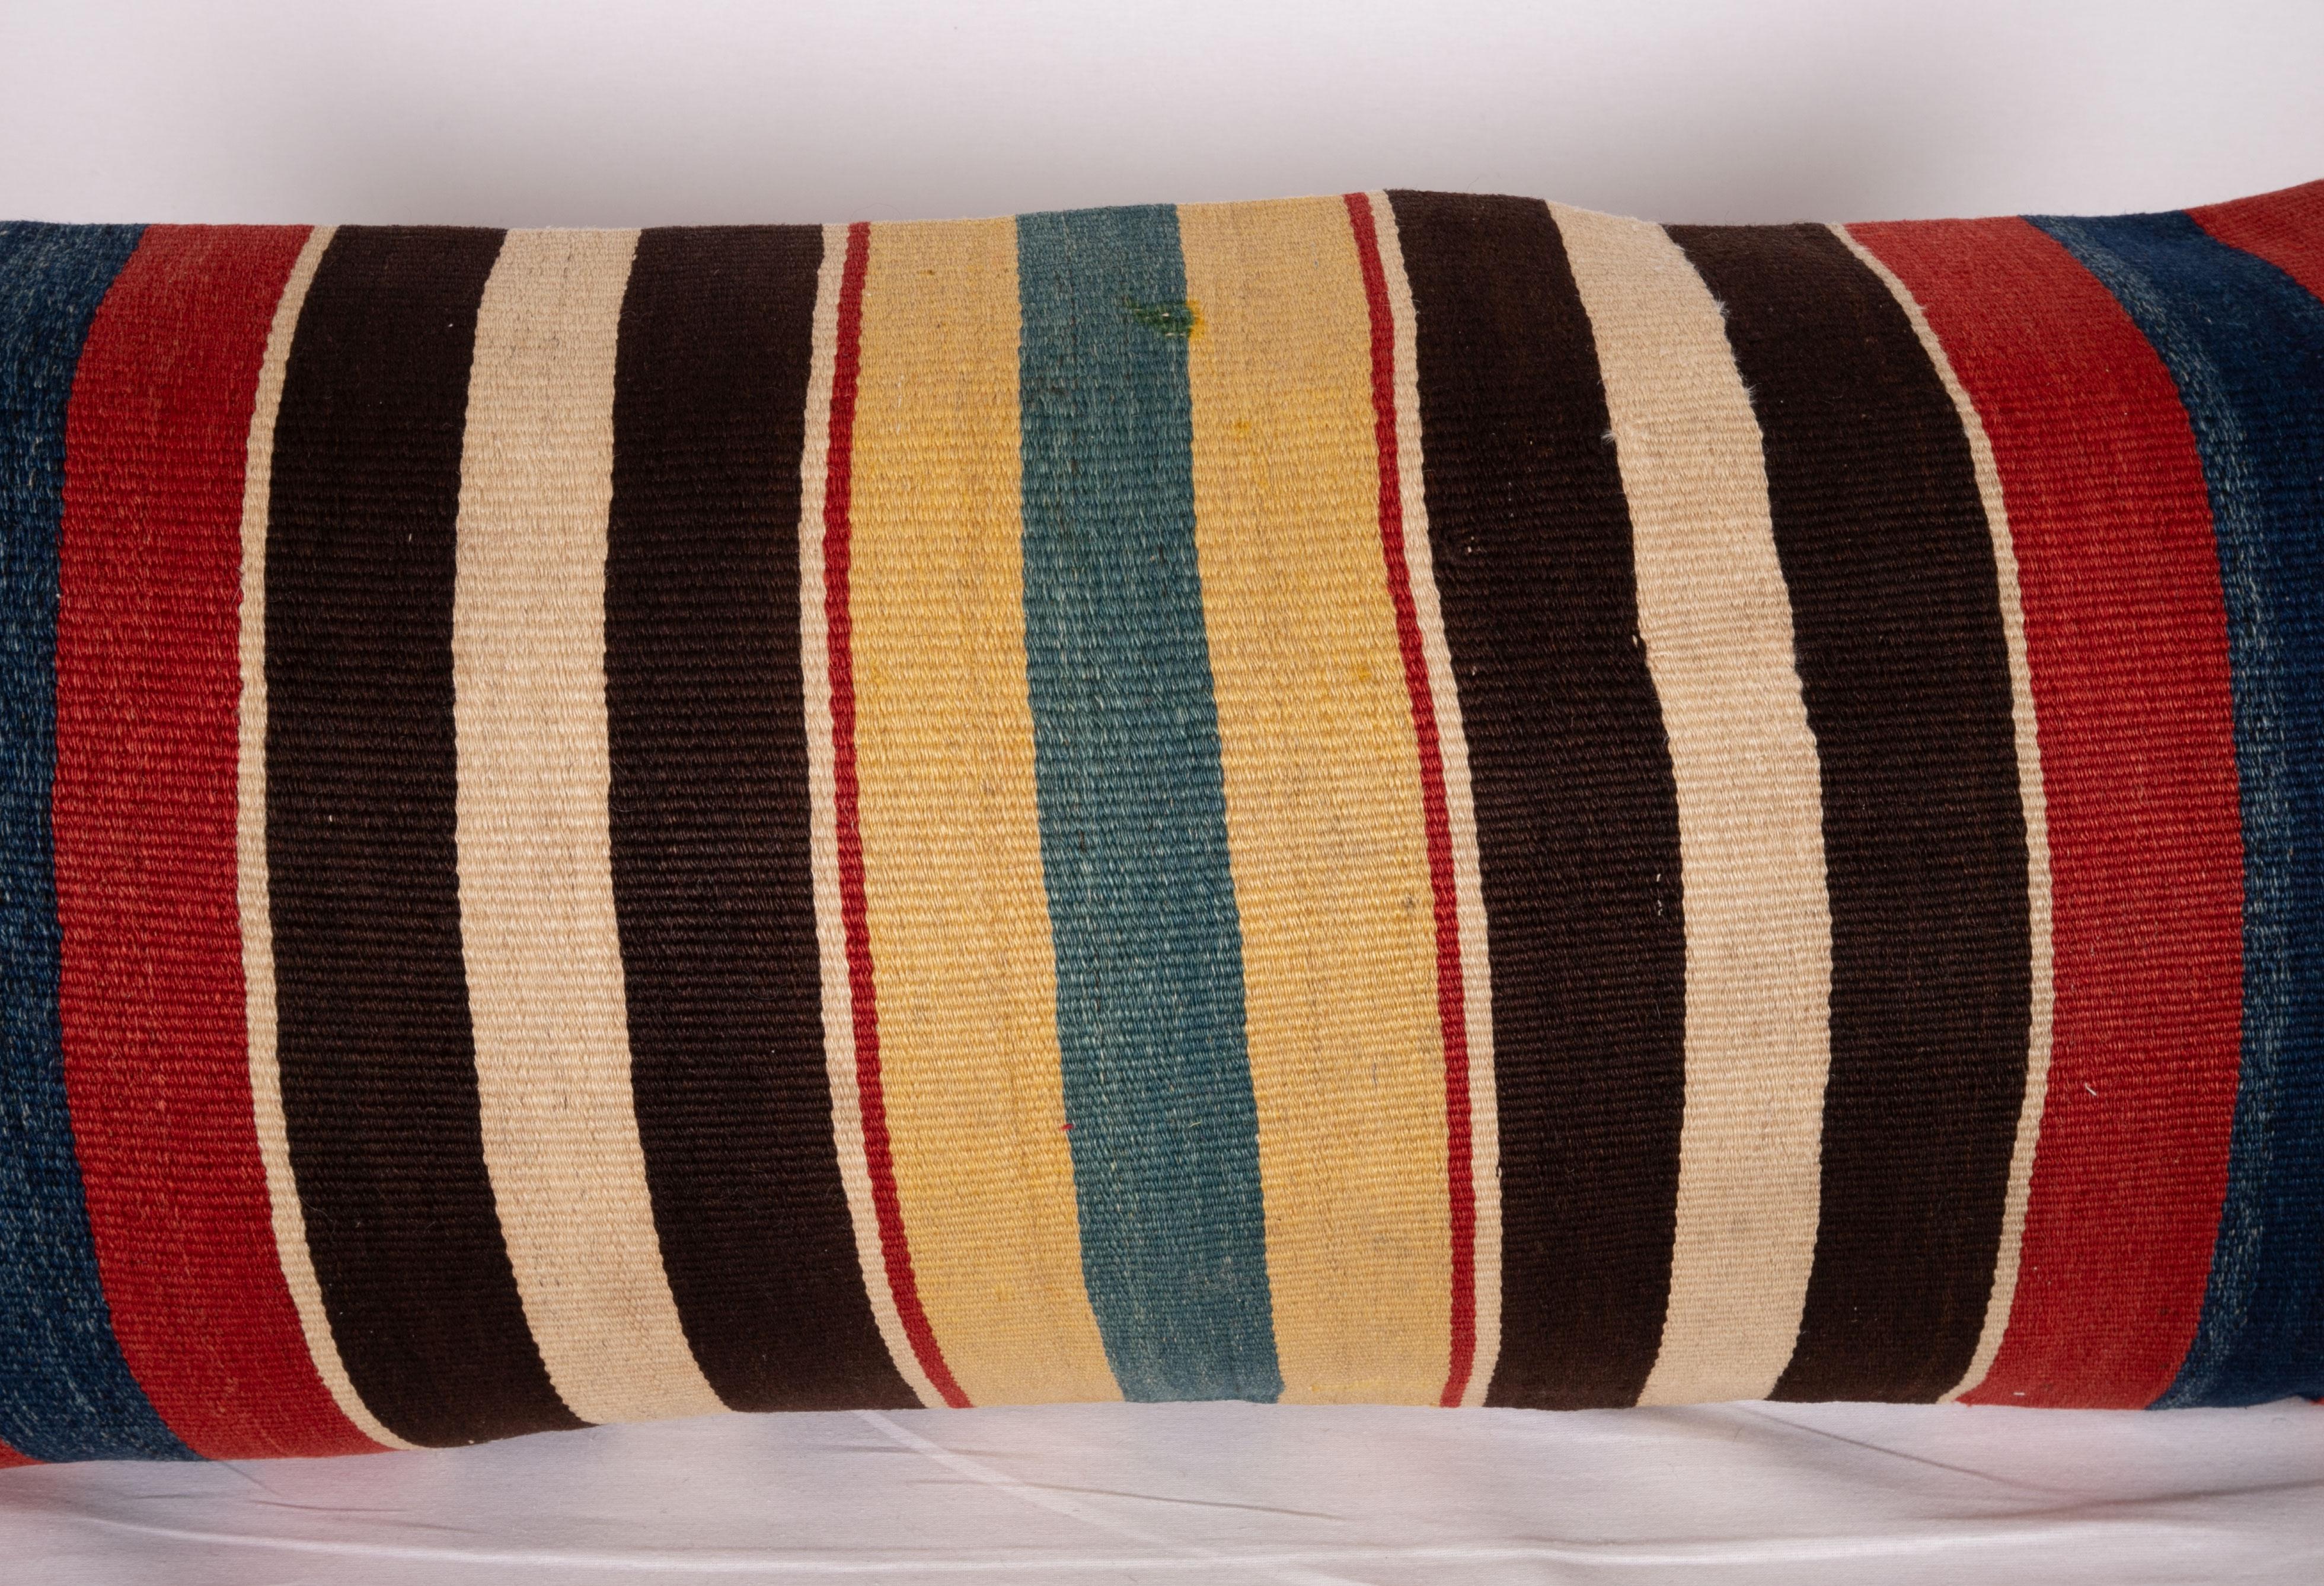 Hand-Woven Antique Kilim Pillow Case Made from a 19th Century South Caucasian Kilim